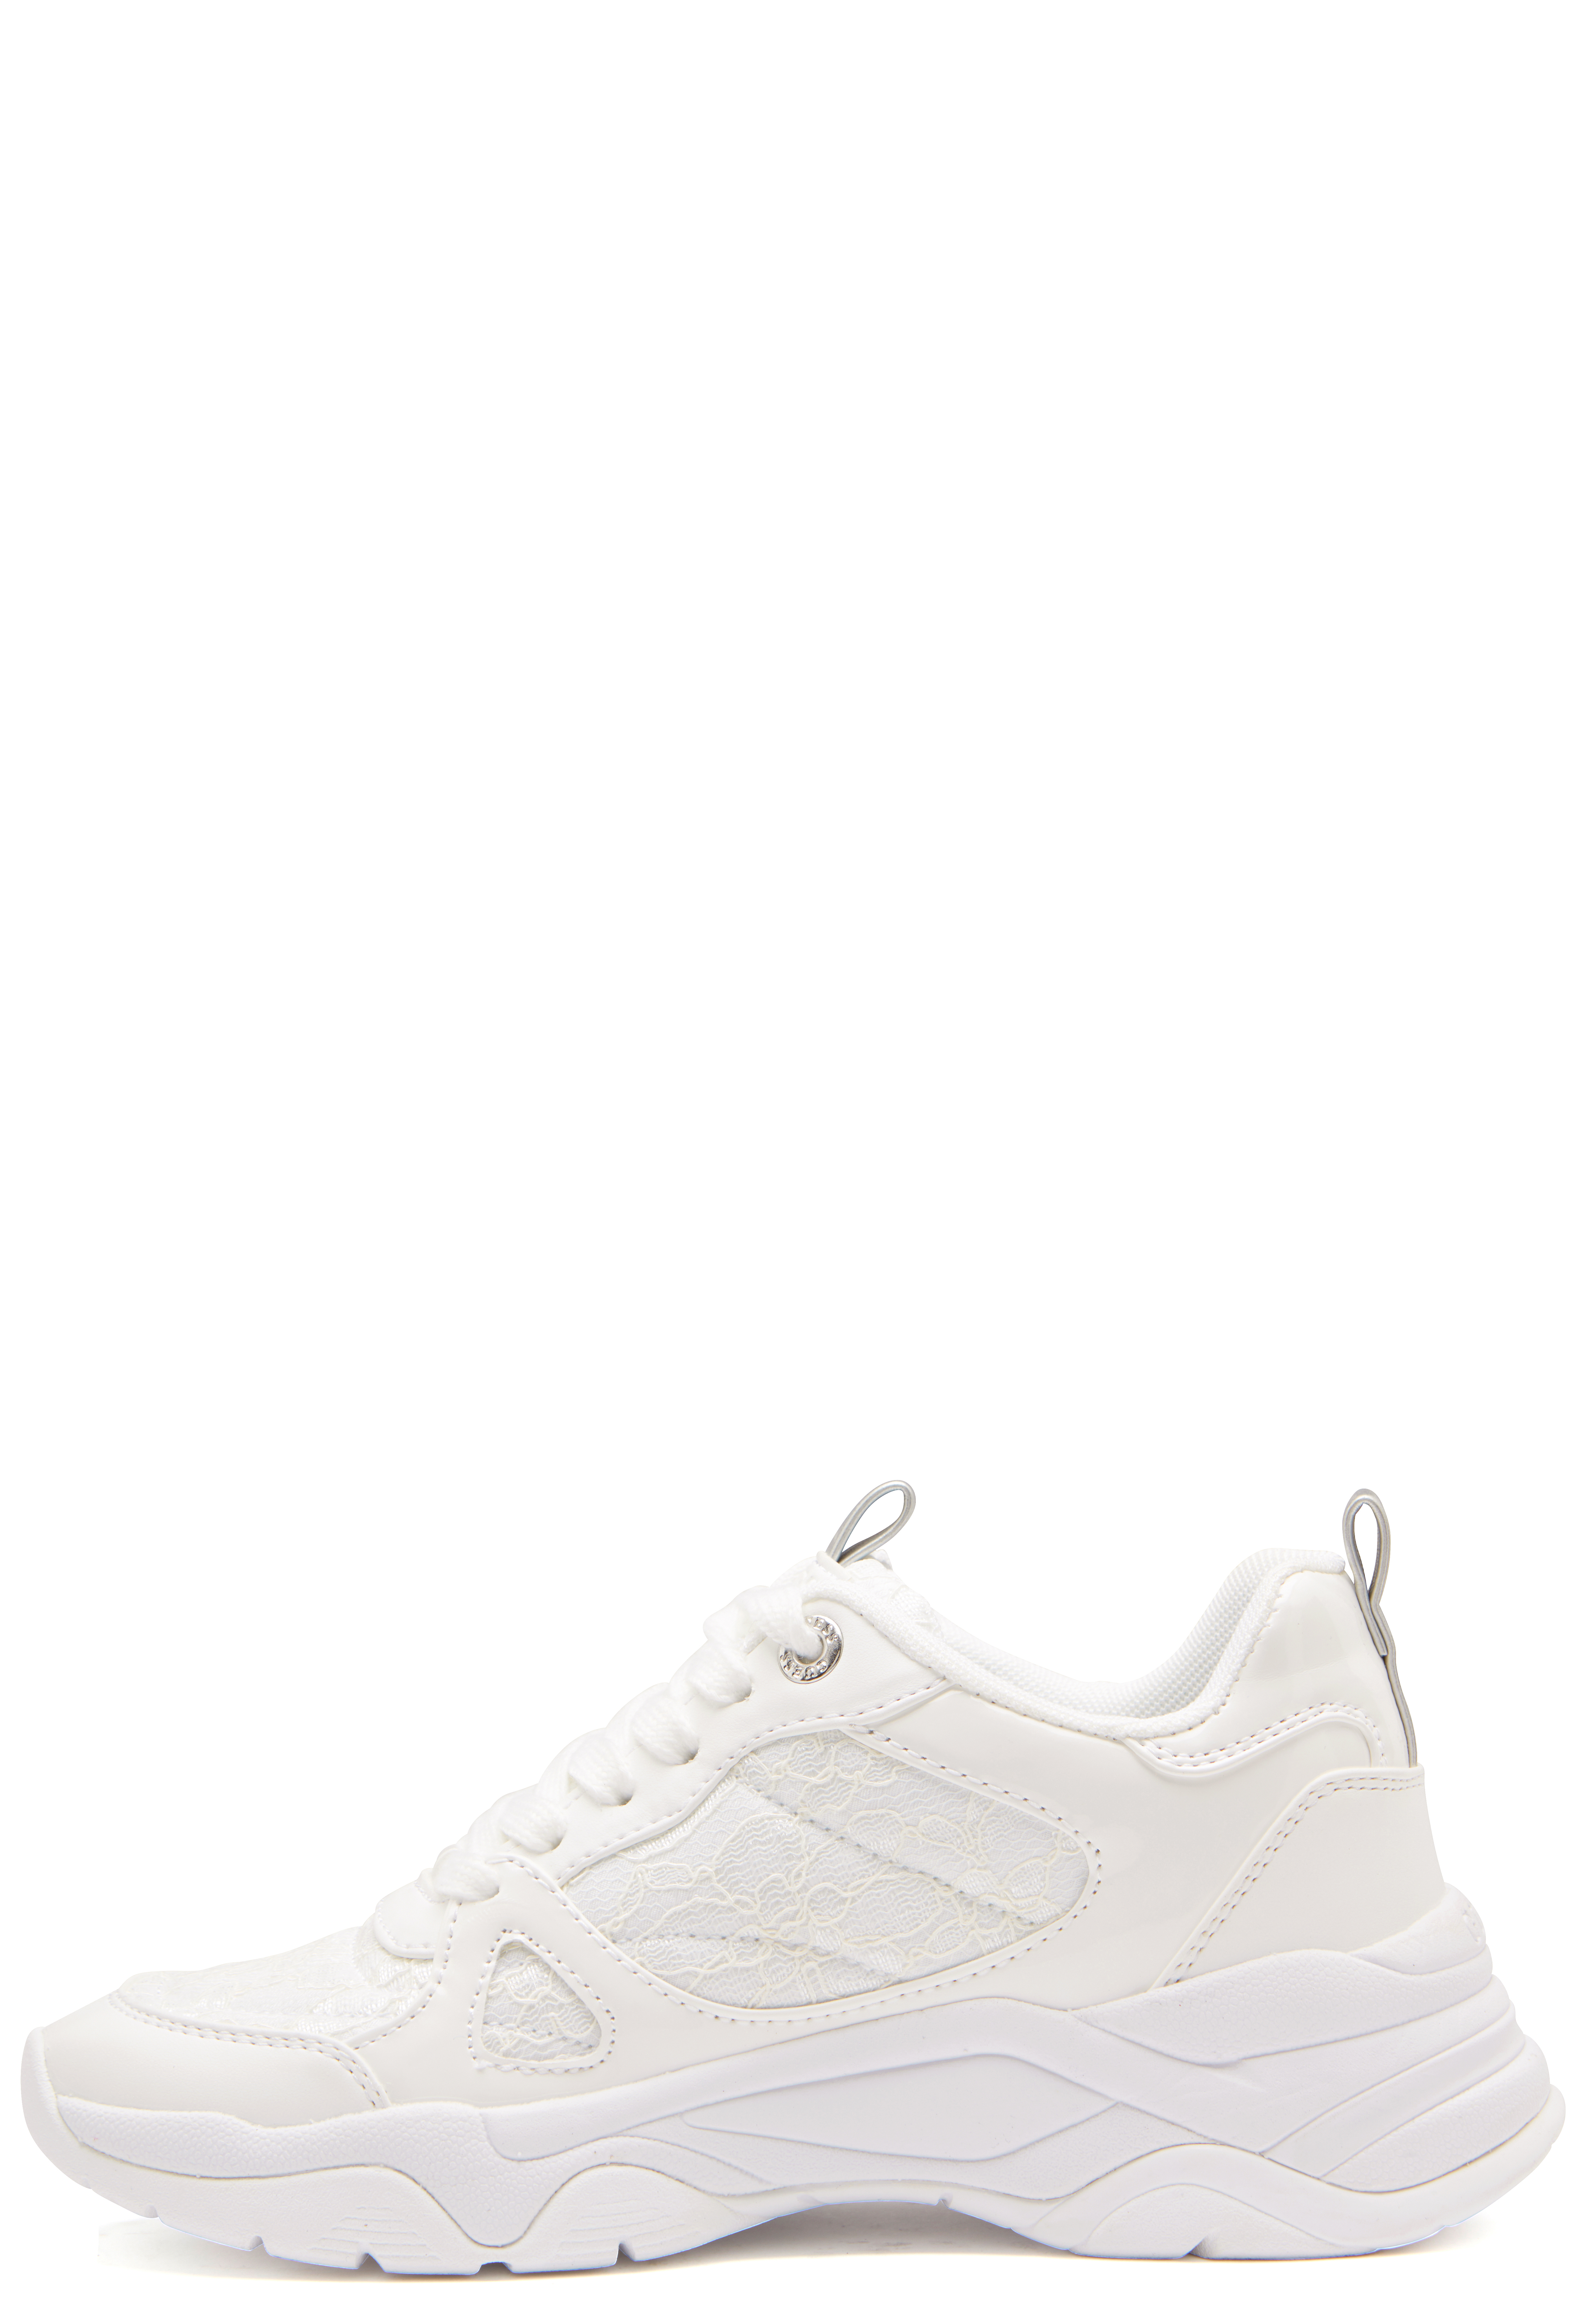 Guess Flaus Sneakers White - Bubbleroom